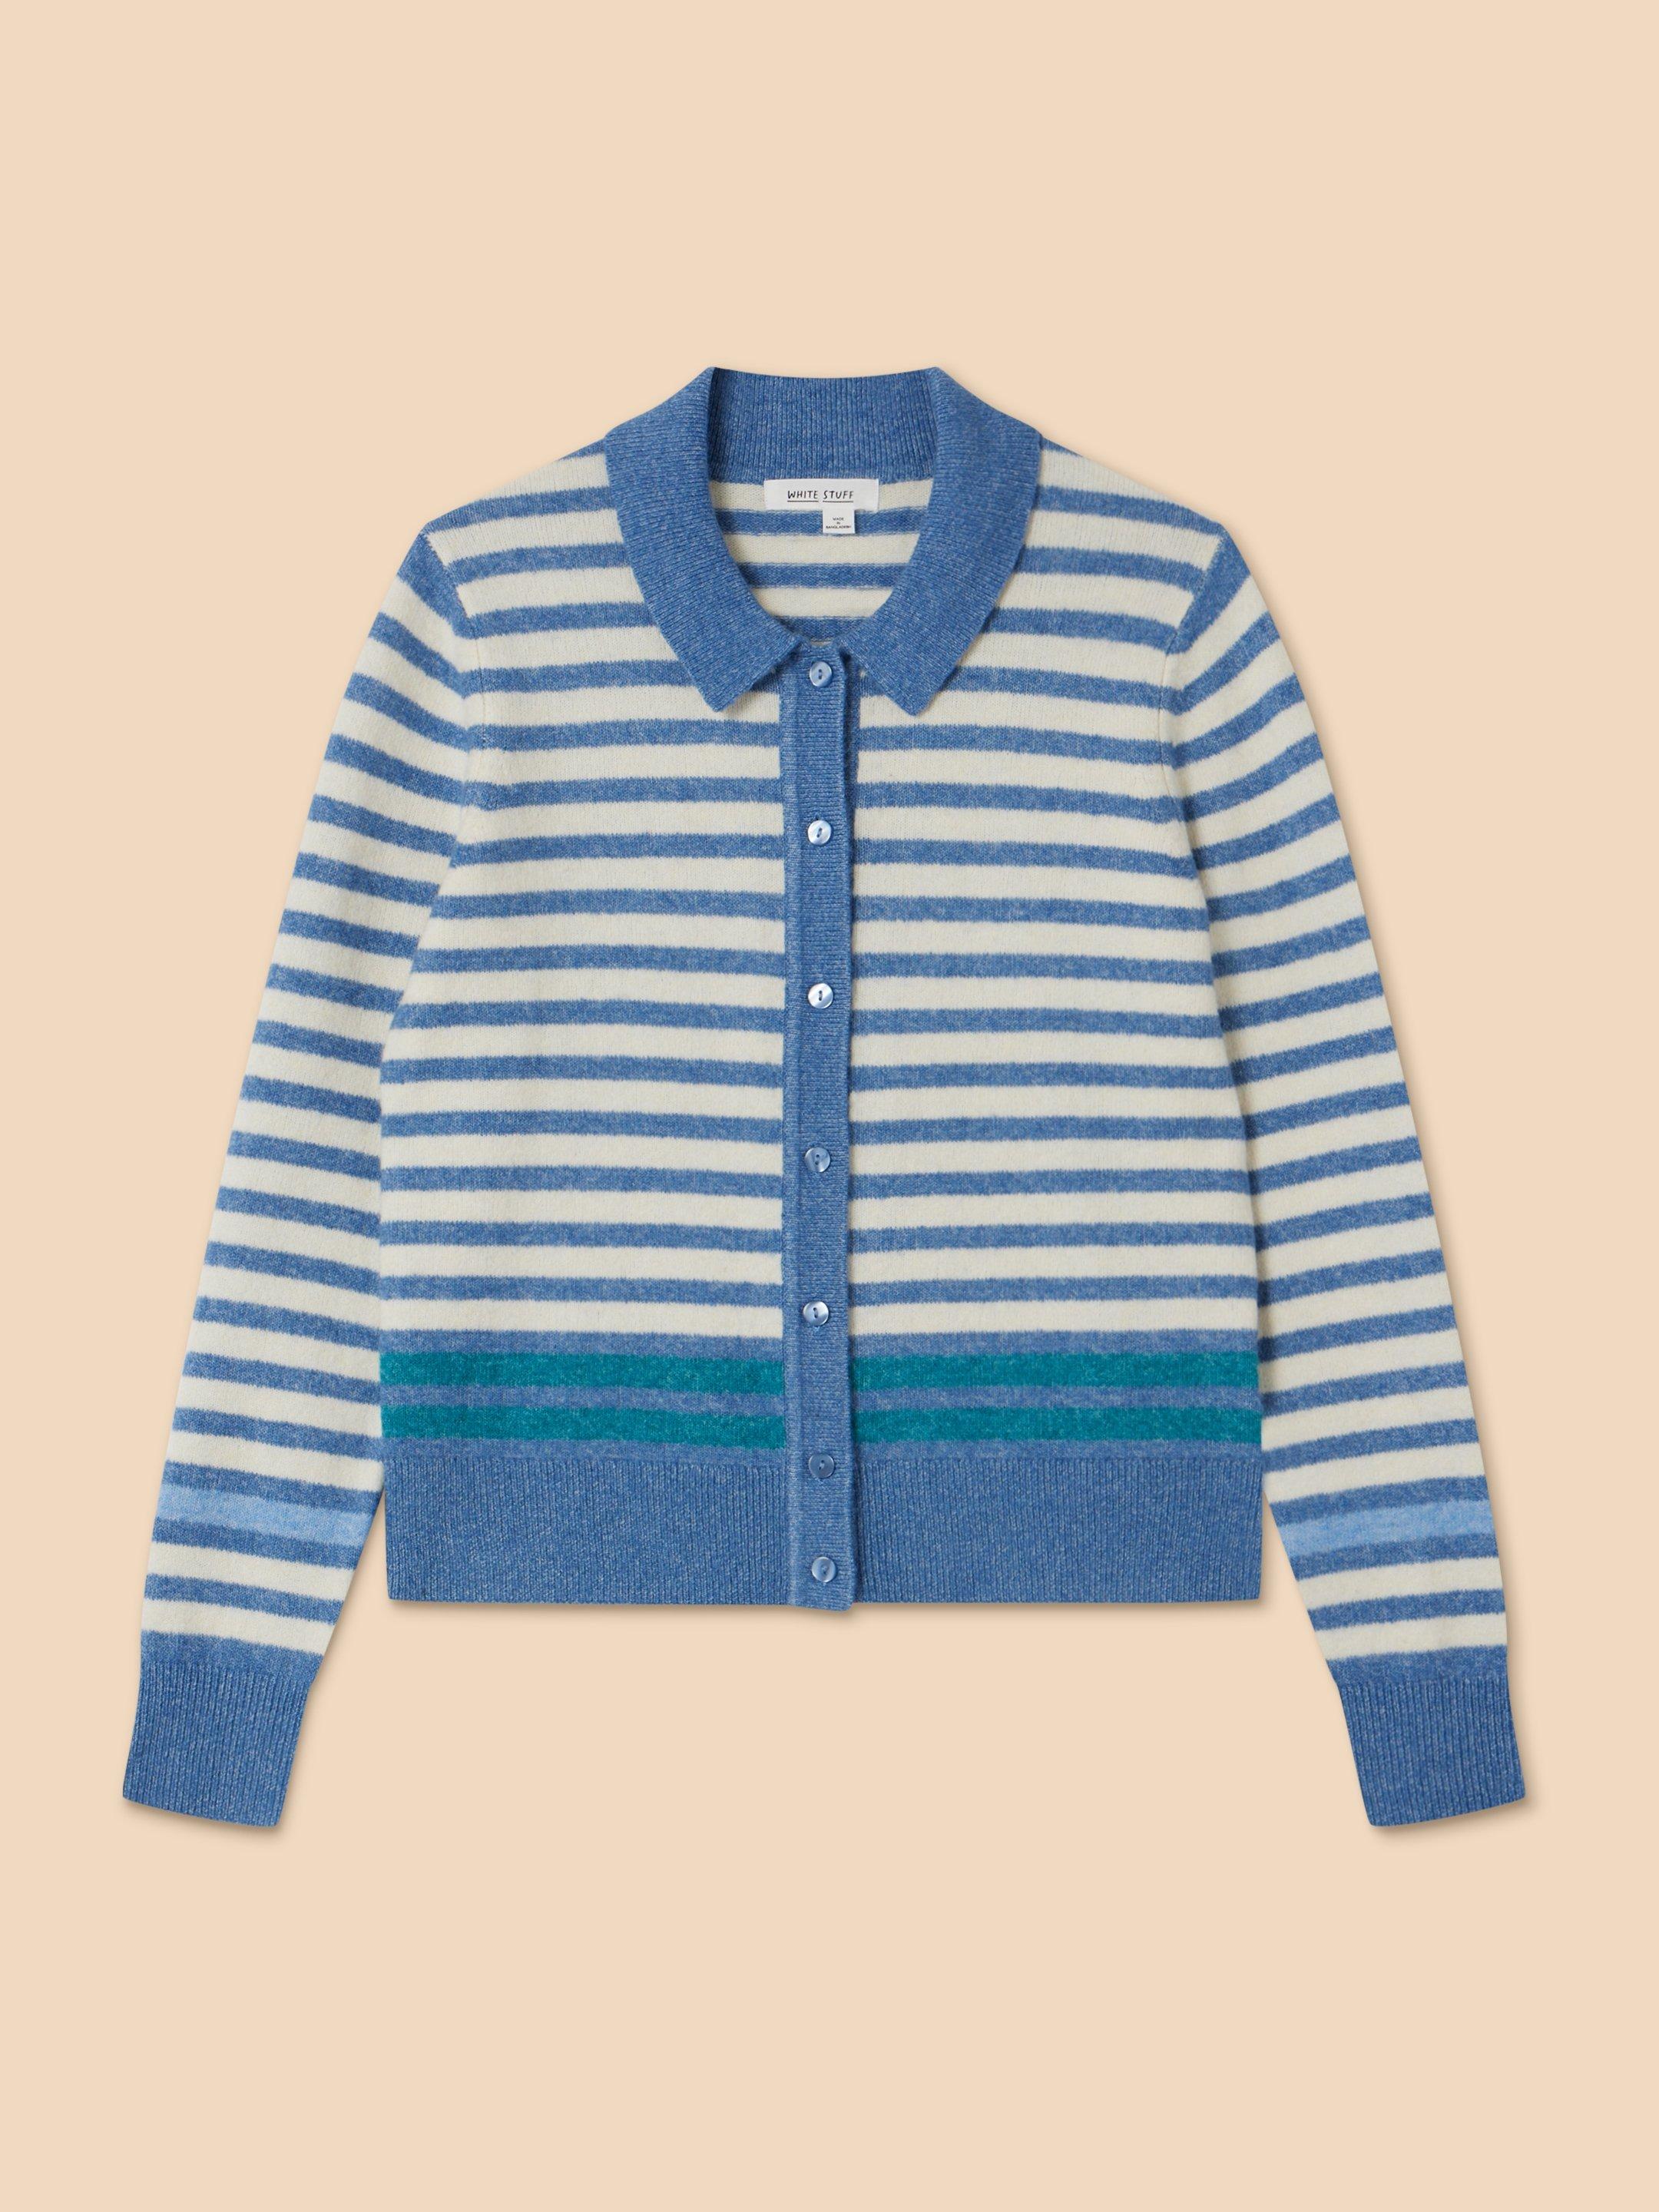 PEONY COLLARED CARDIGAN in BLUE MLT - FLAT FRONT